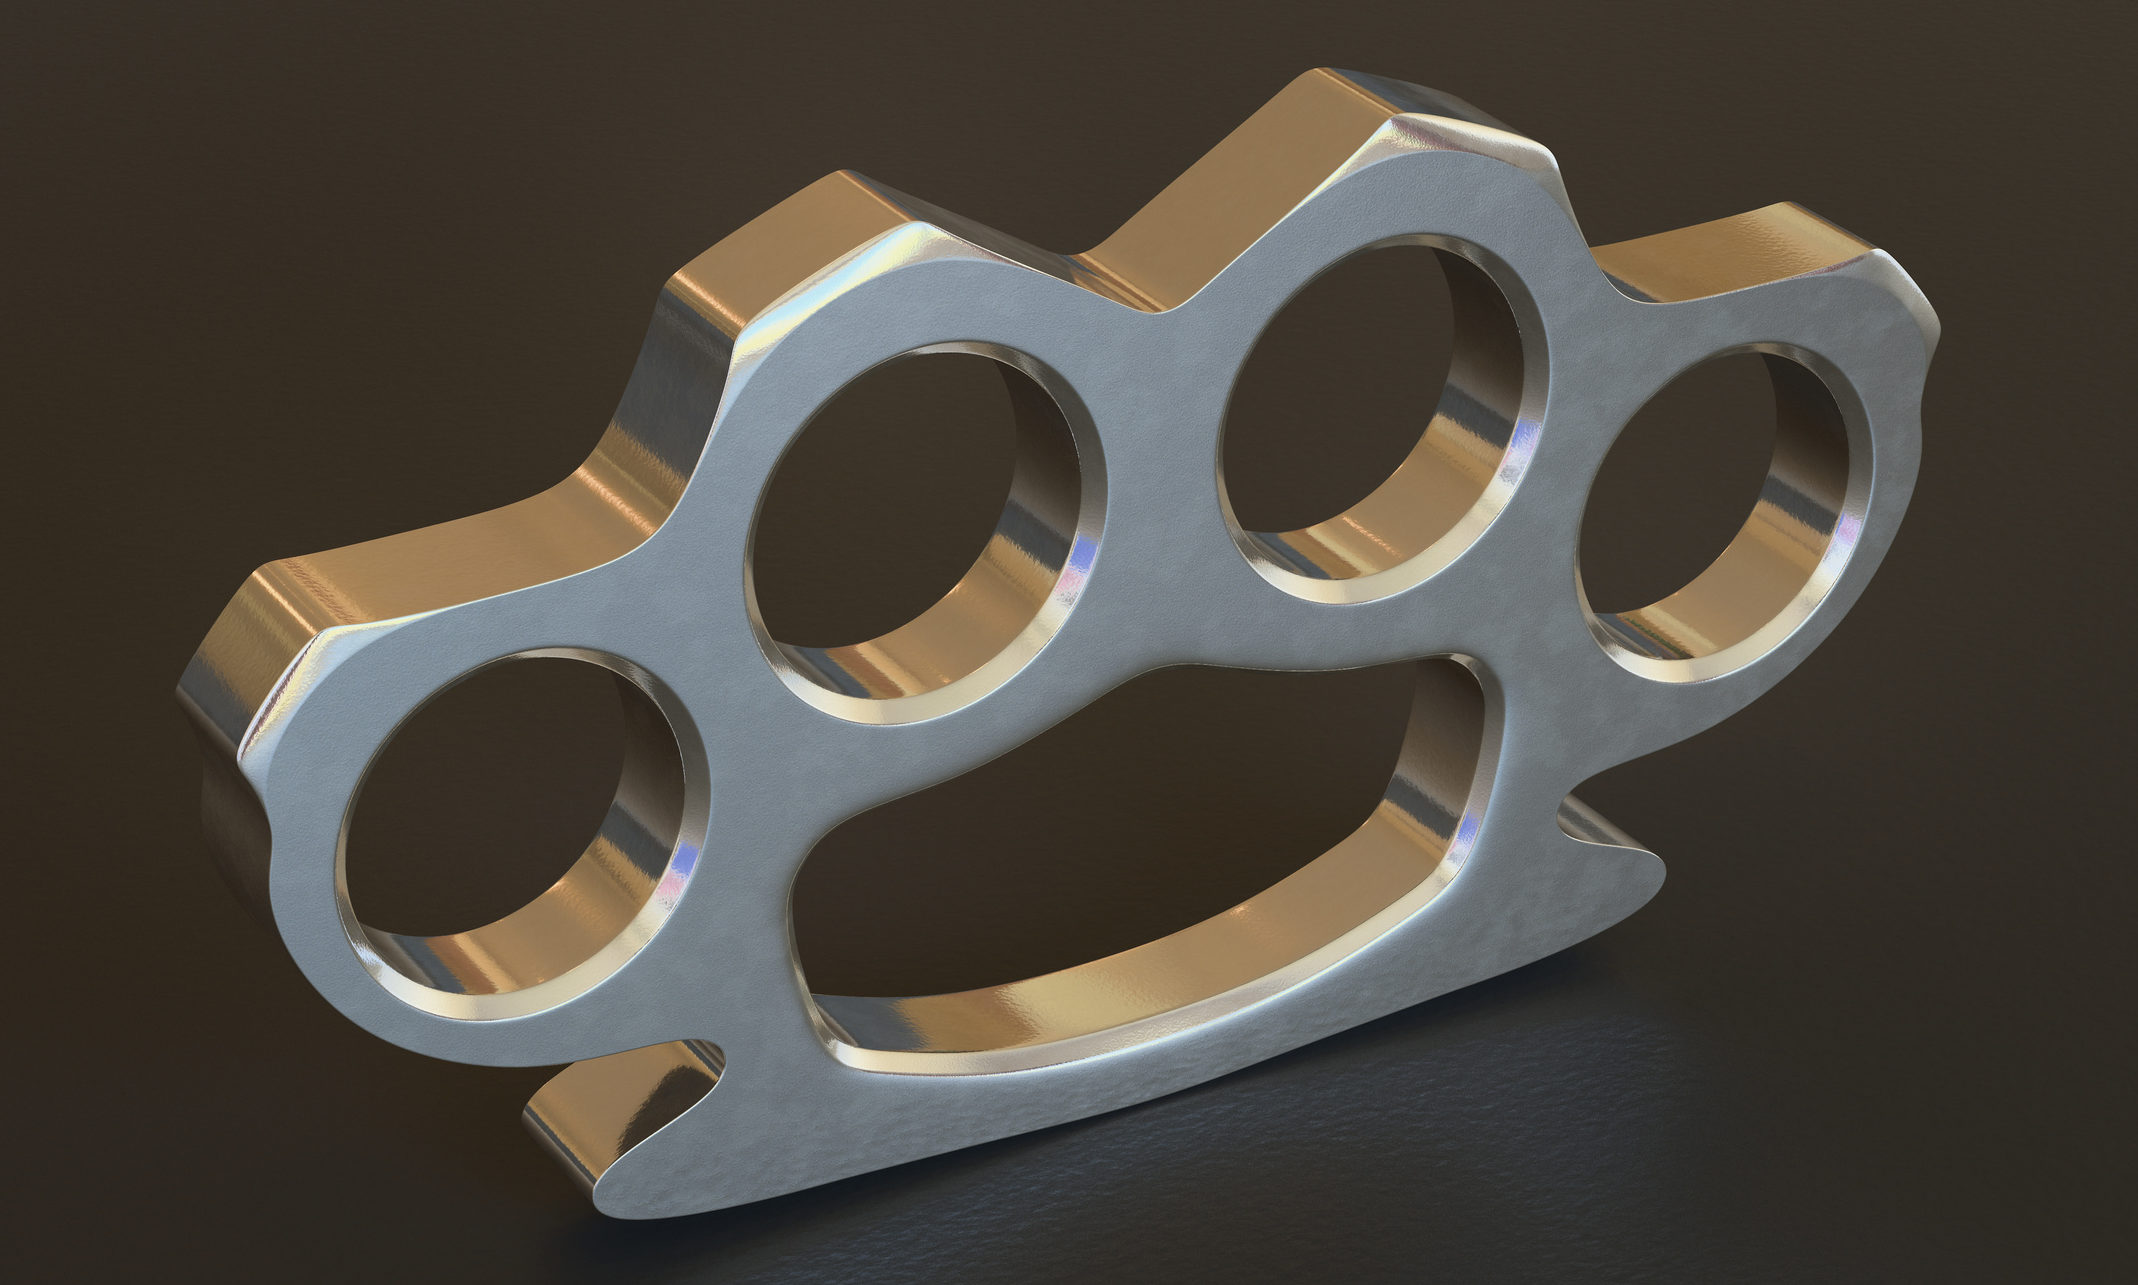 A knuckleduster.